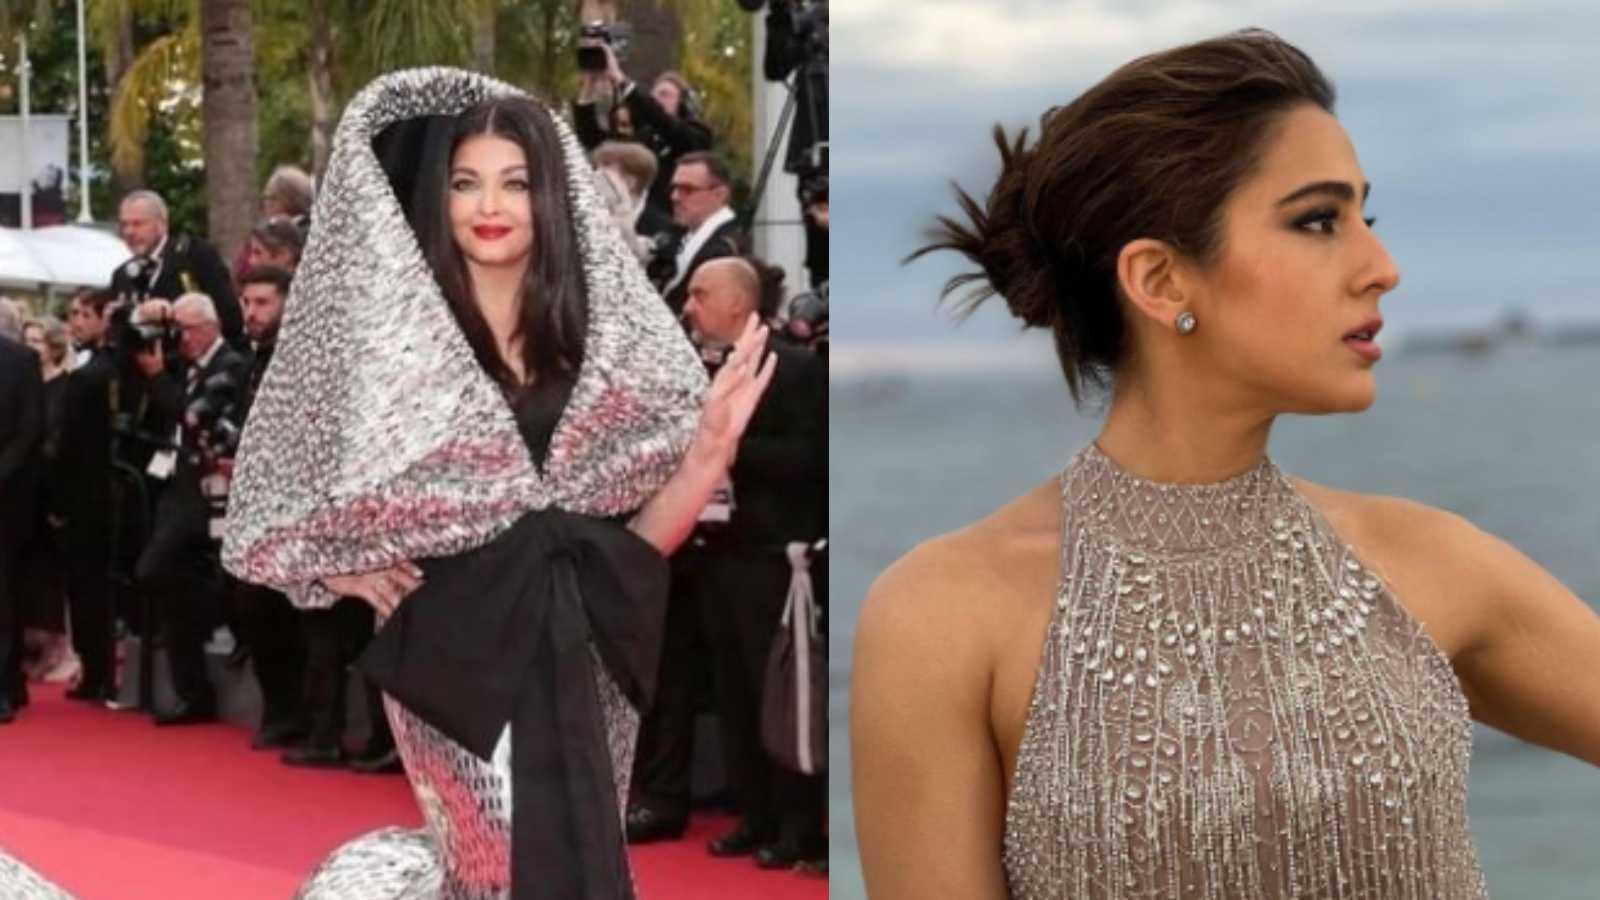 Aishwarya Rai Bachchan, Sara Ali Khan, Mrunal Thakur and others exude opulence in their latest looks at the Cannes Film Festival; see pics